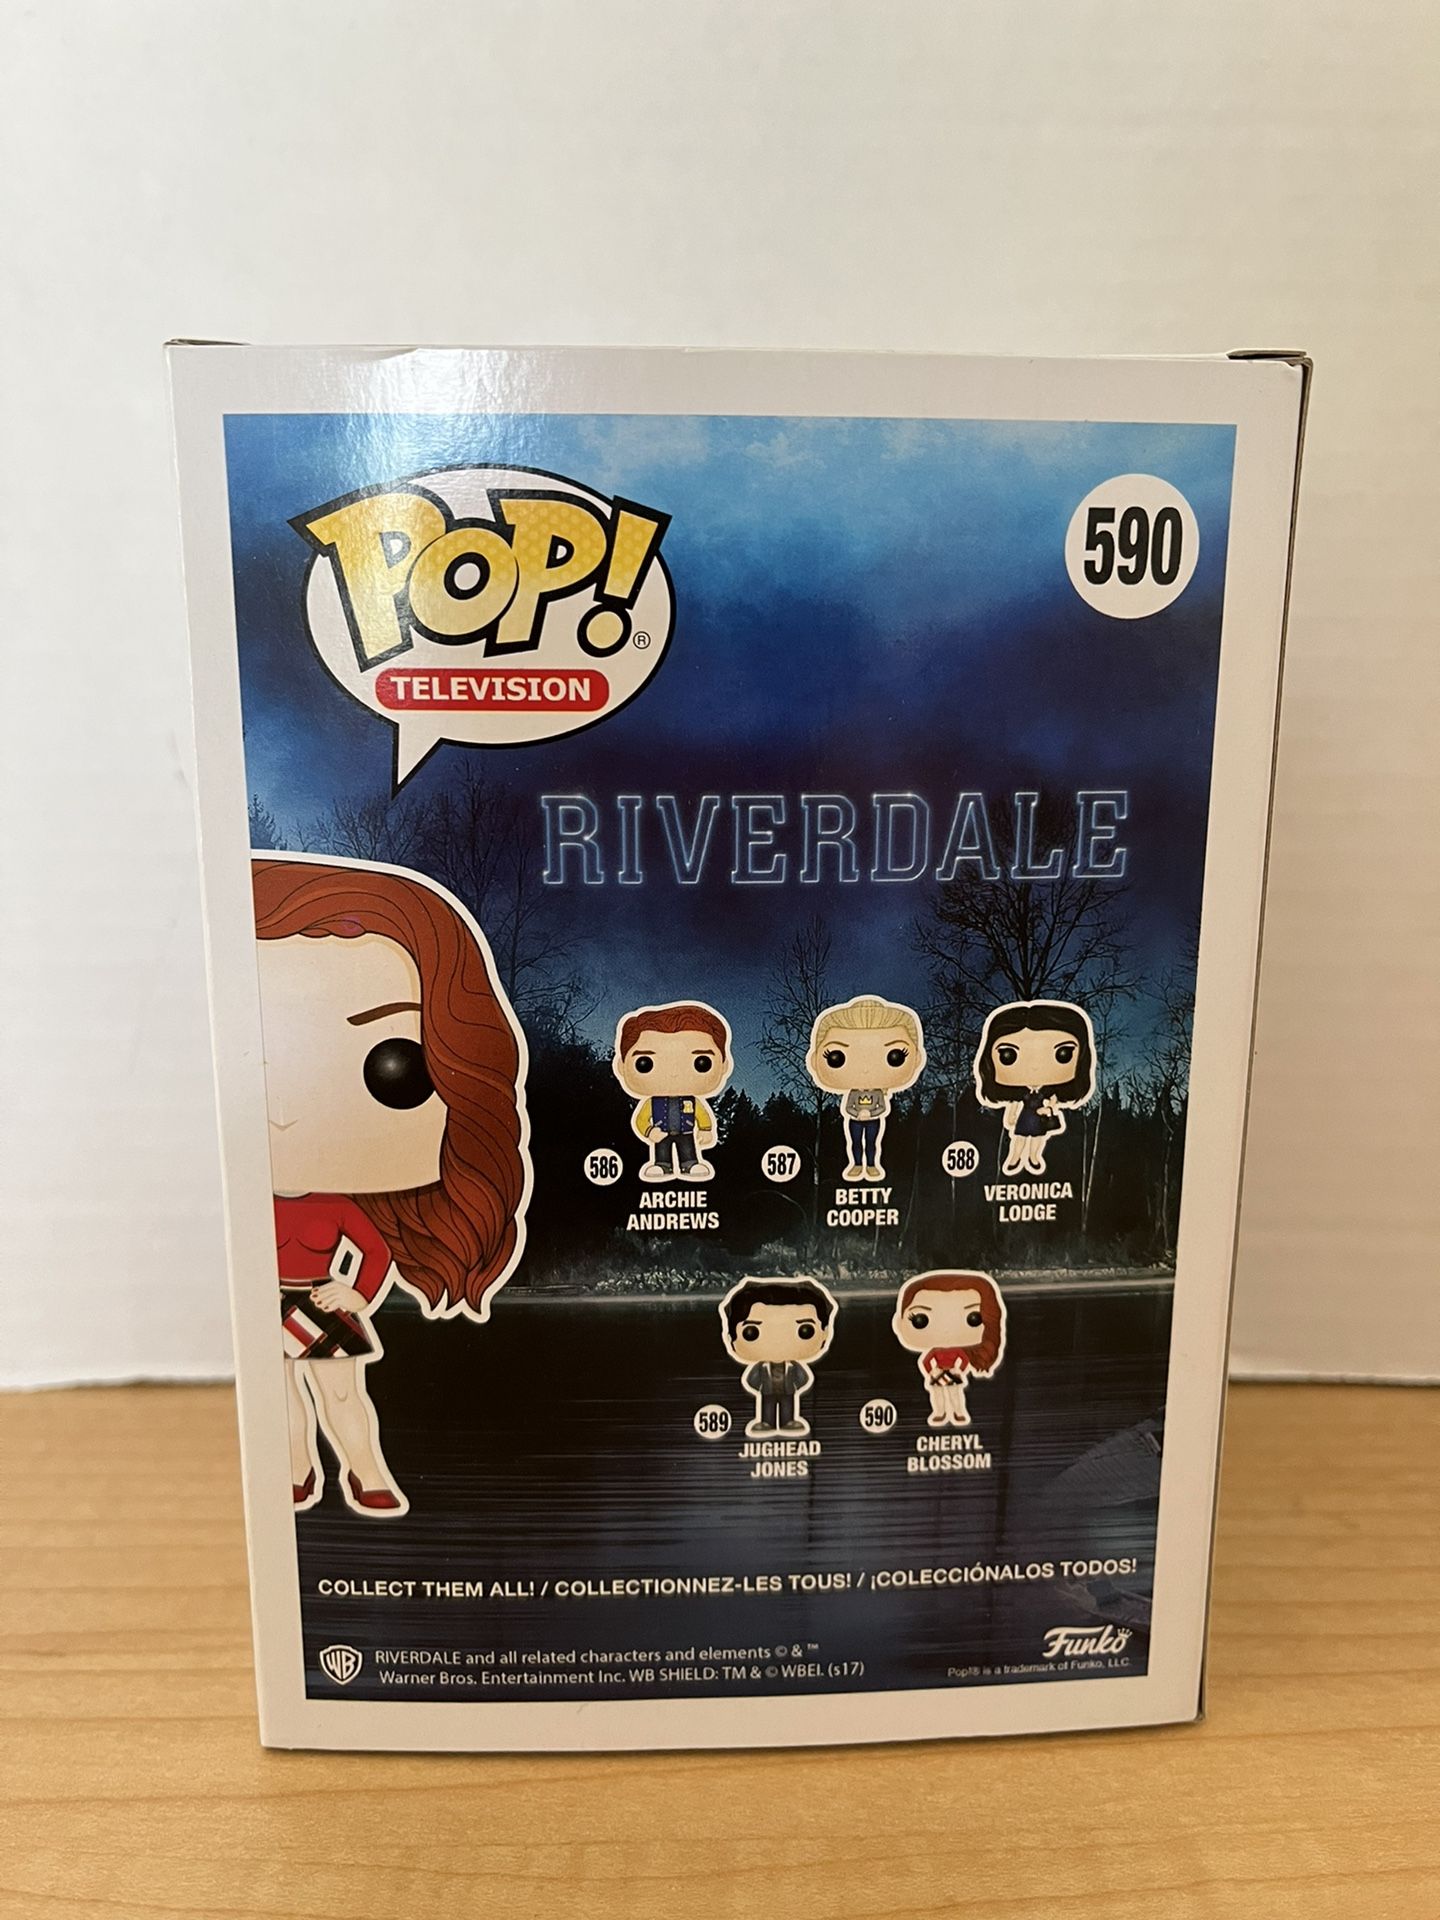 Cheryl # 590 Funko Pop - Riverdale - Hot Topic Exclusive Pre-Release for Sale in Sandy, UT - OfferUp